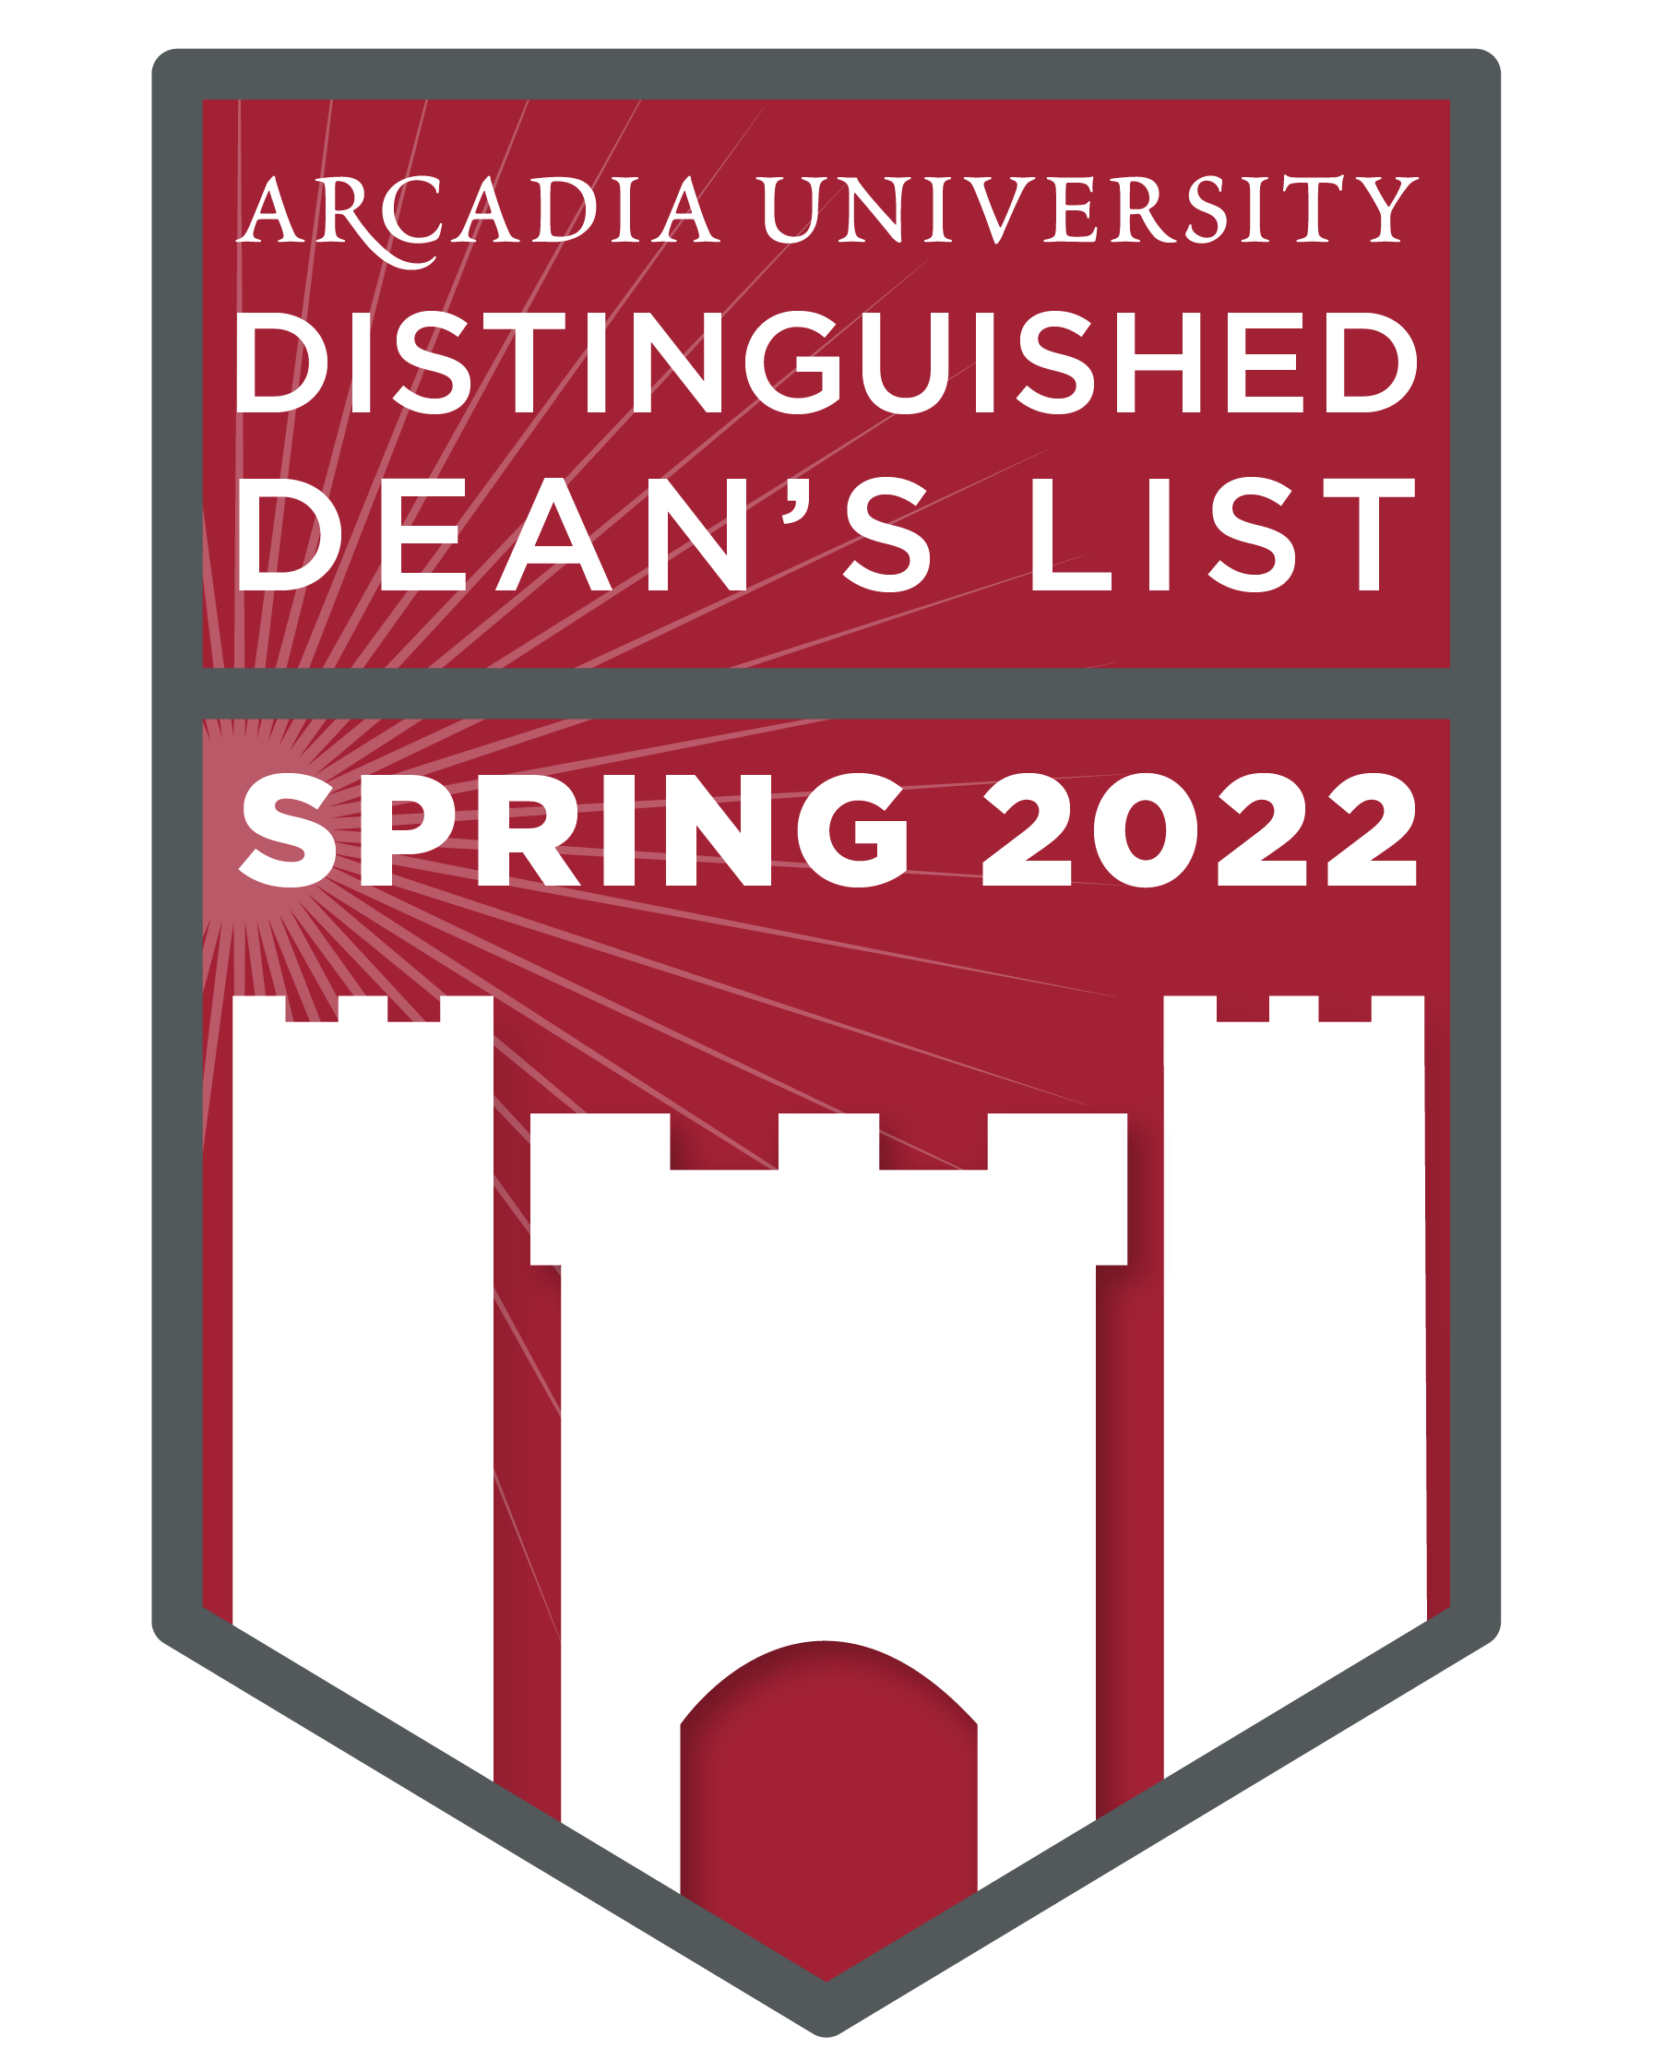 The badge for the spring 2022 Honors Distinguished Deans List at Arcadia.